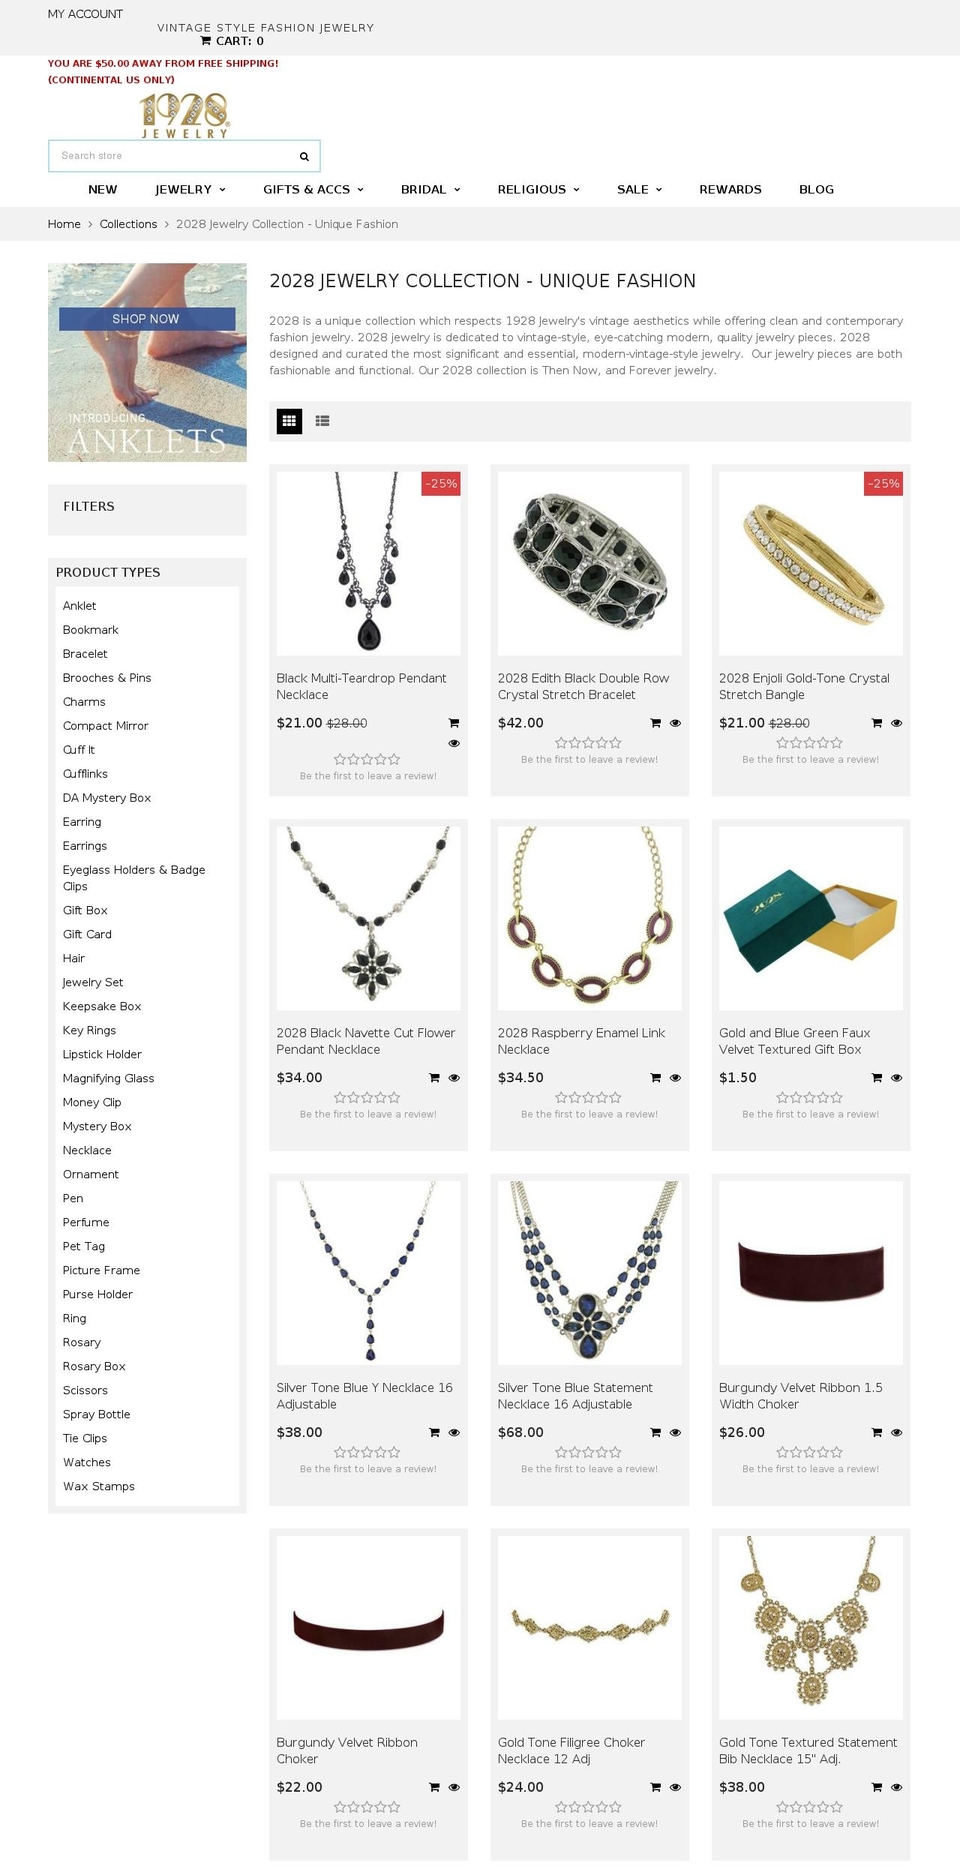 theme363 W\/BOLD UPSELL FINE 6\/30 2PM Shopify theme site example 2028jewelry.com